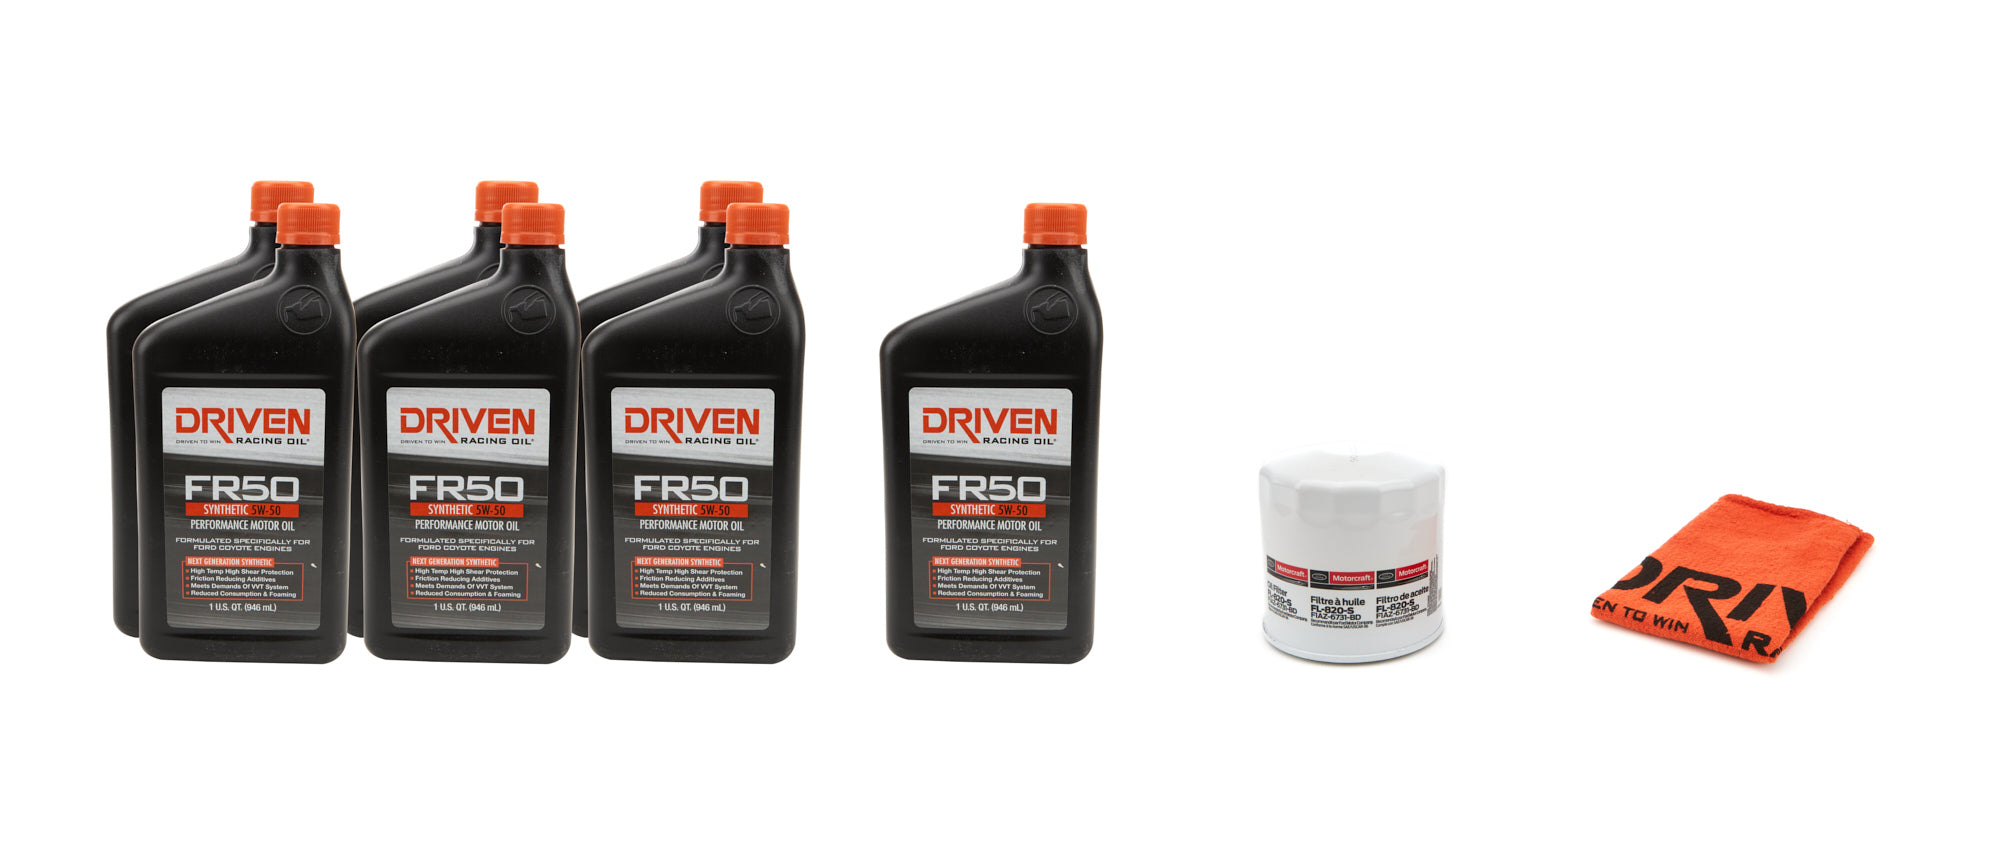 Driven Racing Oil 5w50 Oil Change Kit 13- 14 Mustang GT500 5.8L Oils, Fluids and Additives Motor Oil main image